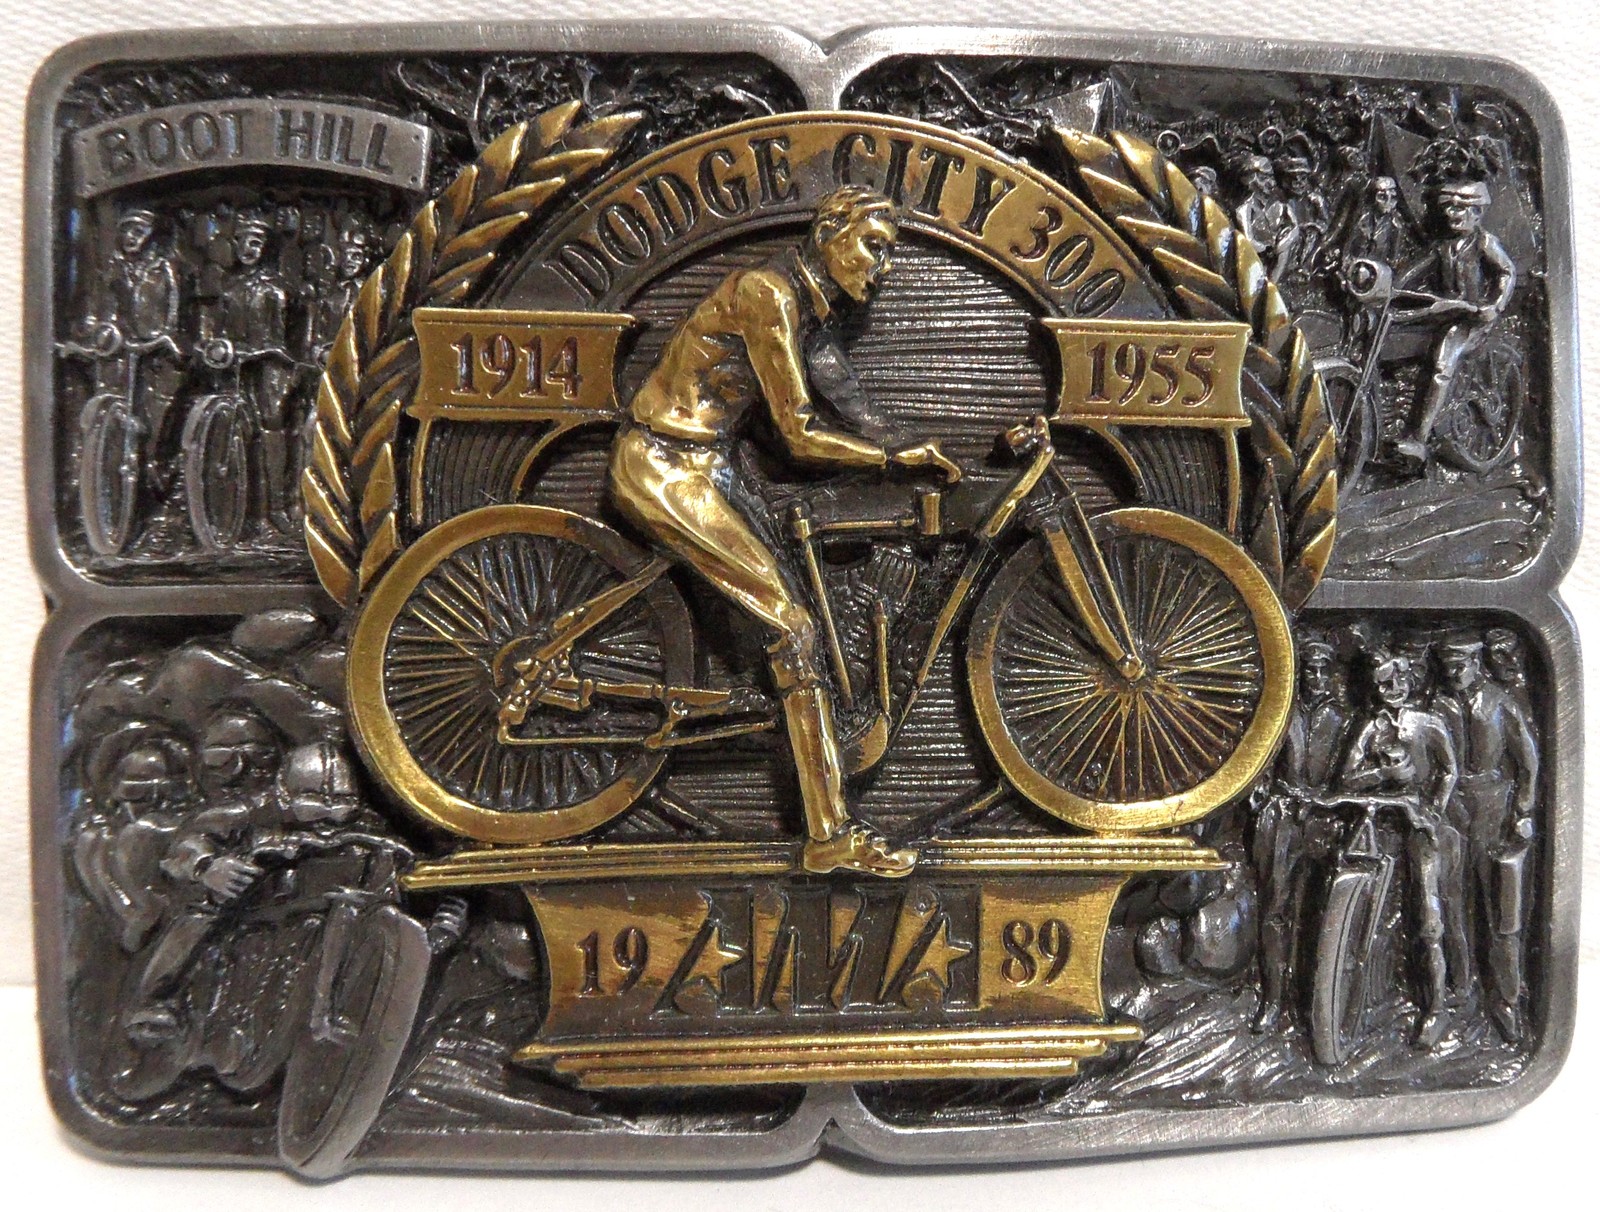 Primary image for 1988/89 Ltd. Edition #1193 Dodge City 300 Boot Hill "1914-1955" AMA Belt Buckle